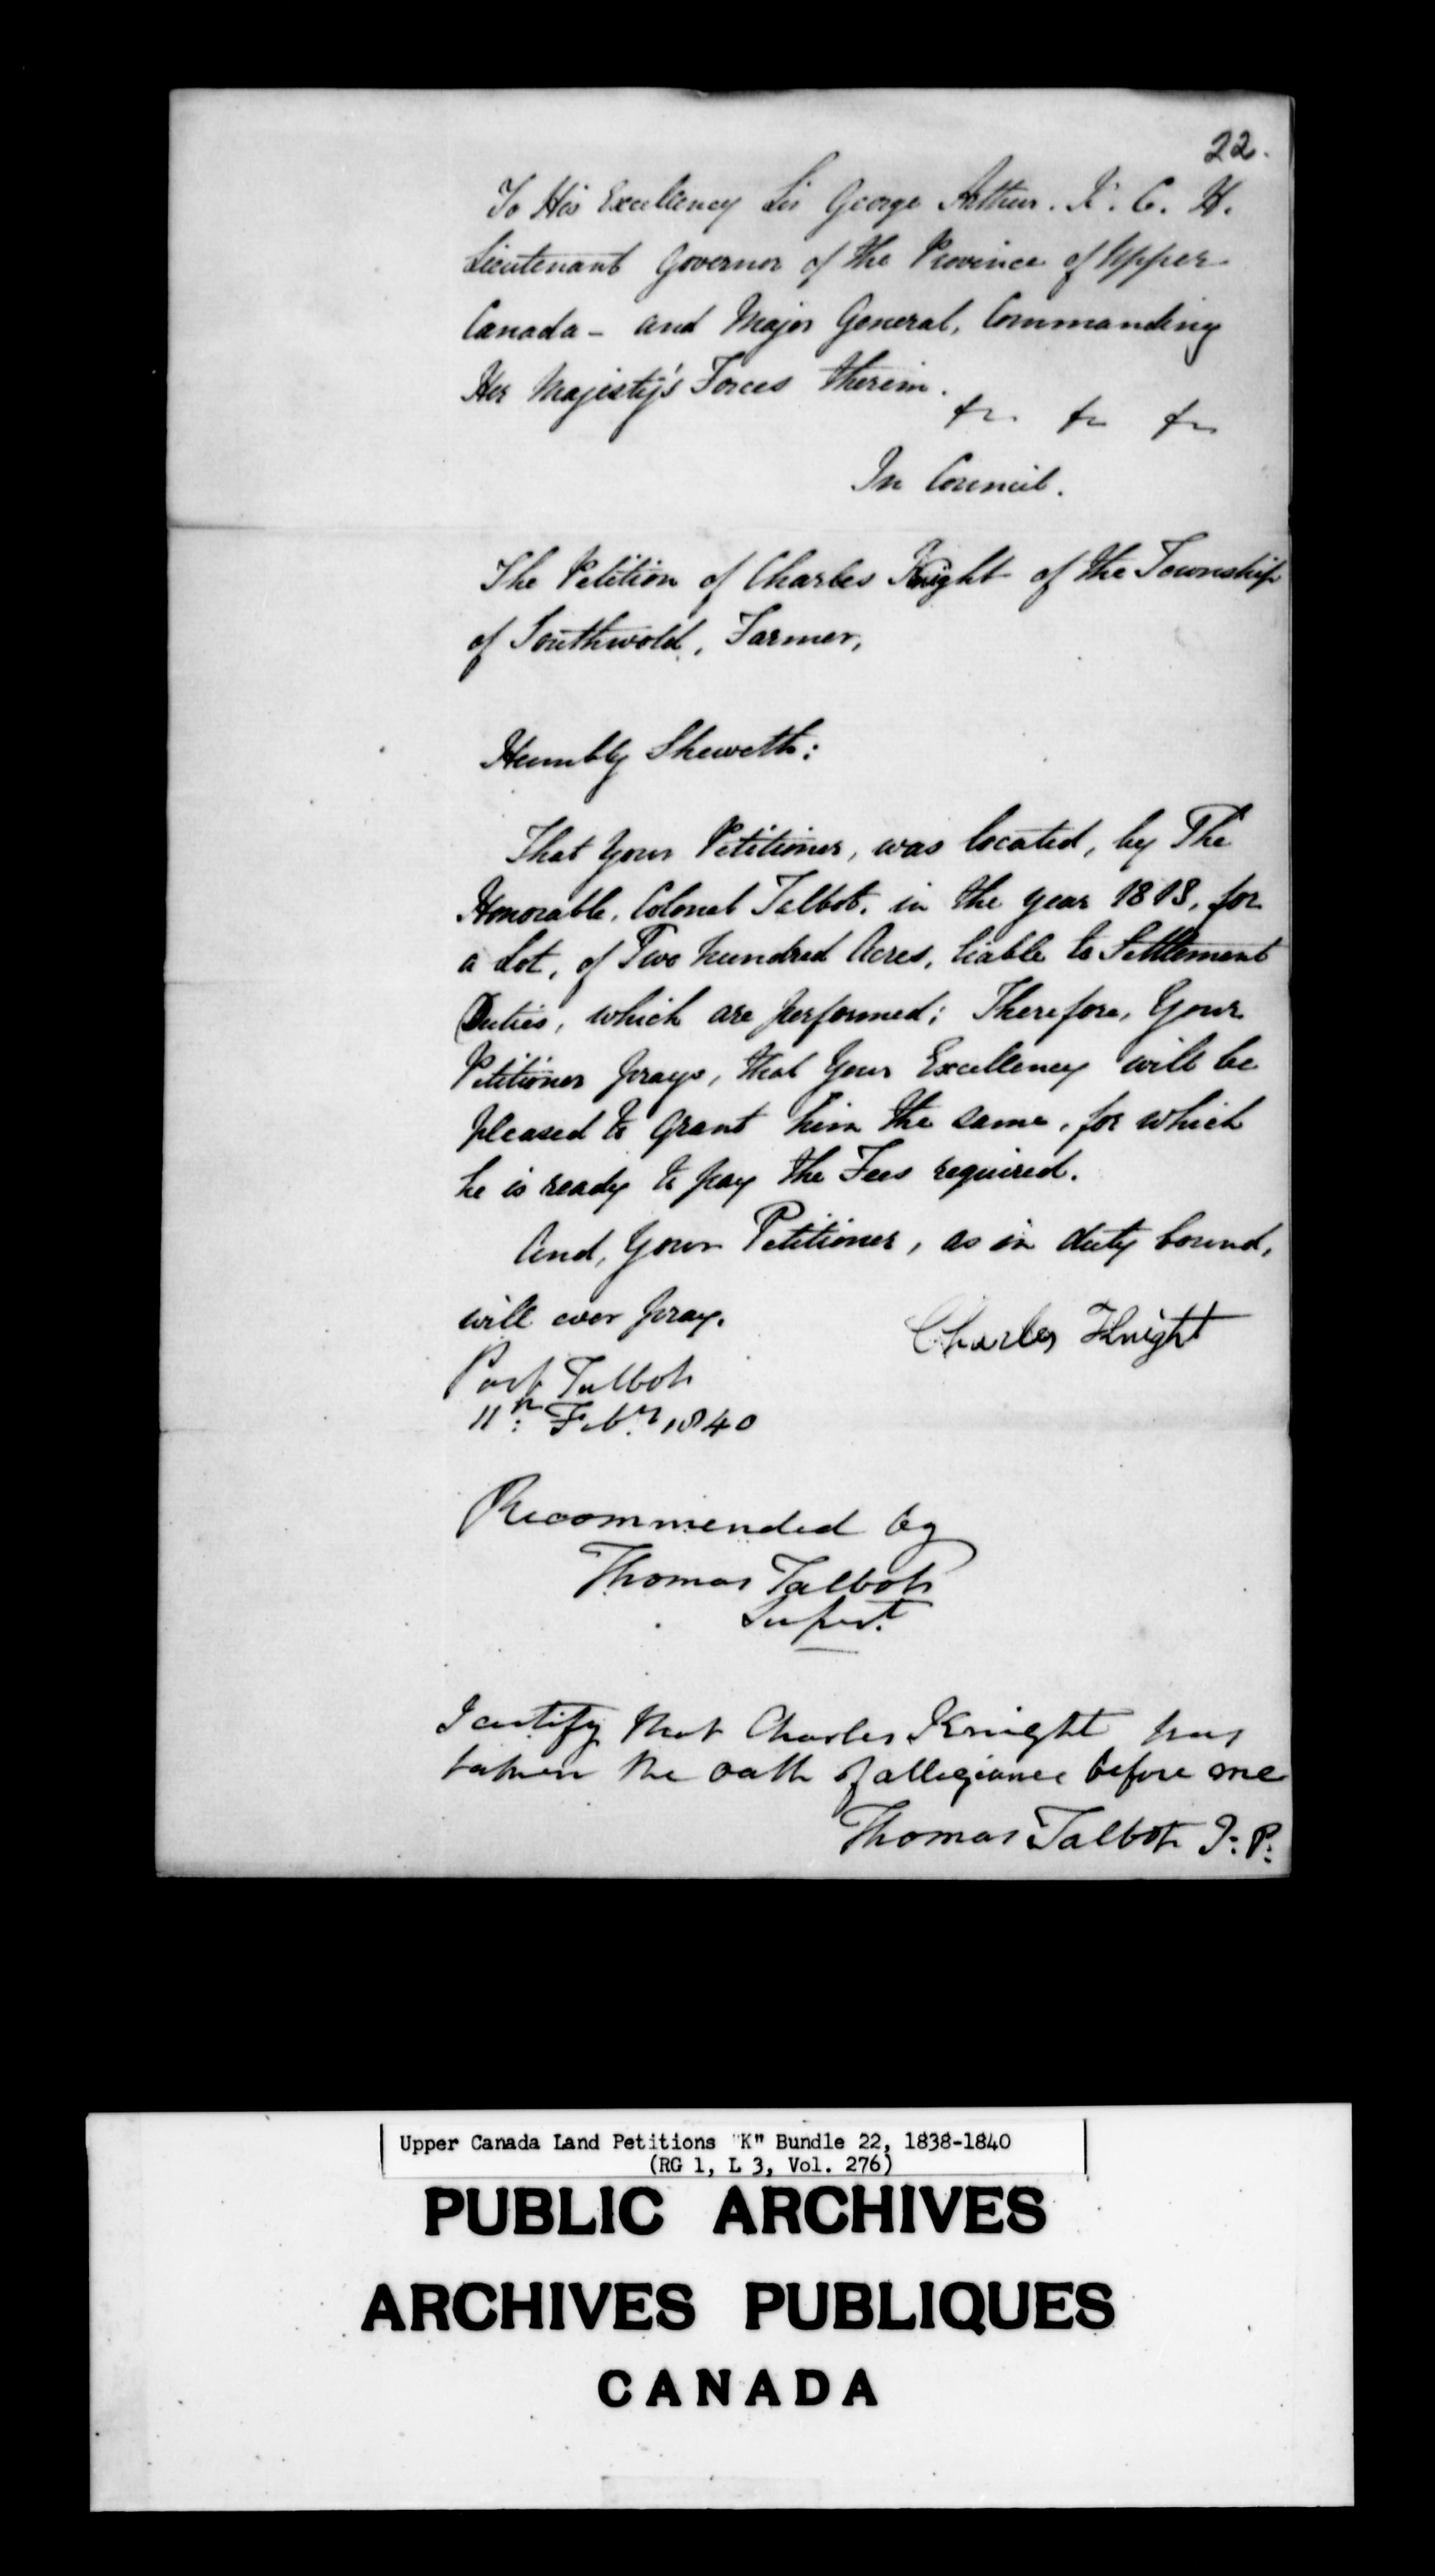 Title: Upper Canada Land Petitions (1763-1865) - Mikan Number: 205131 - Microform: c-2120